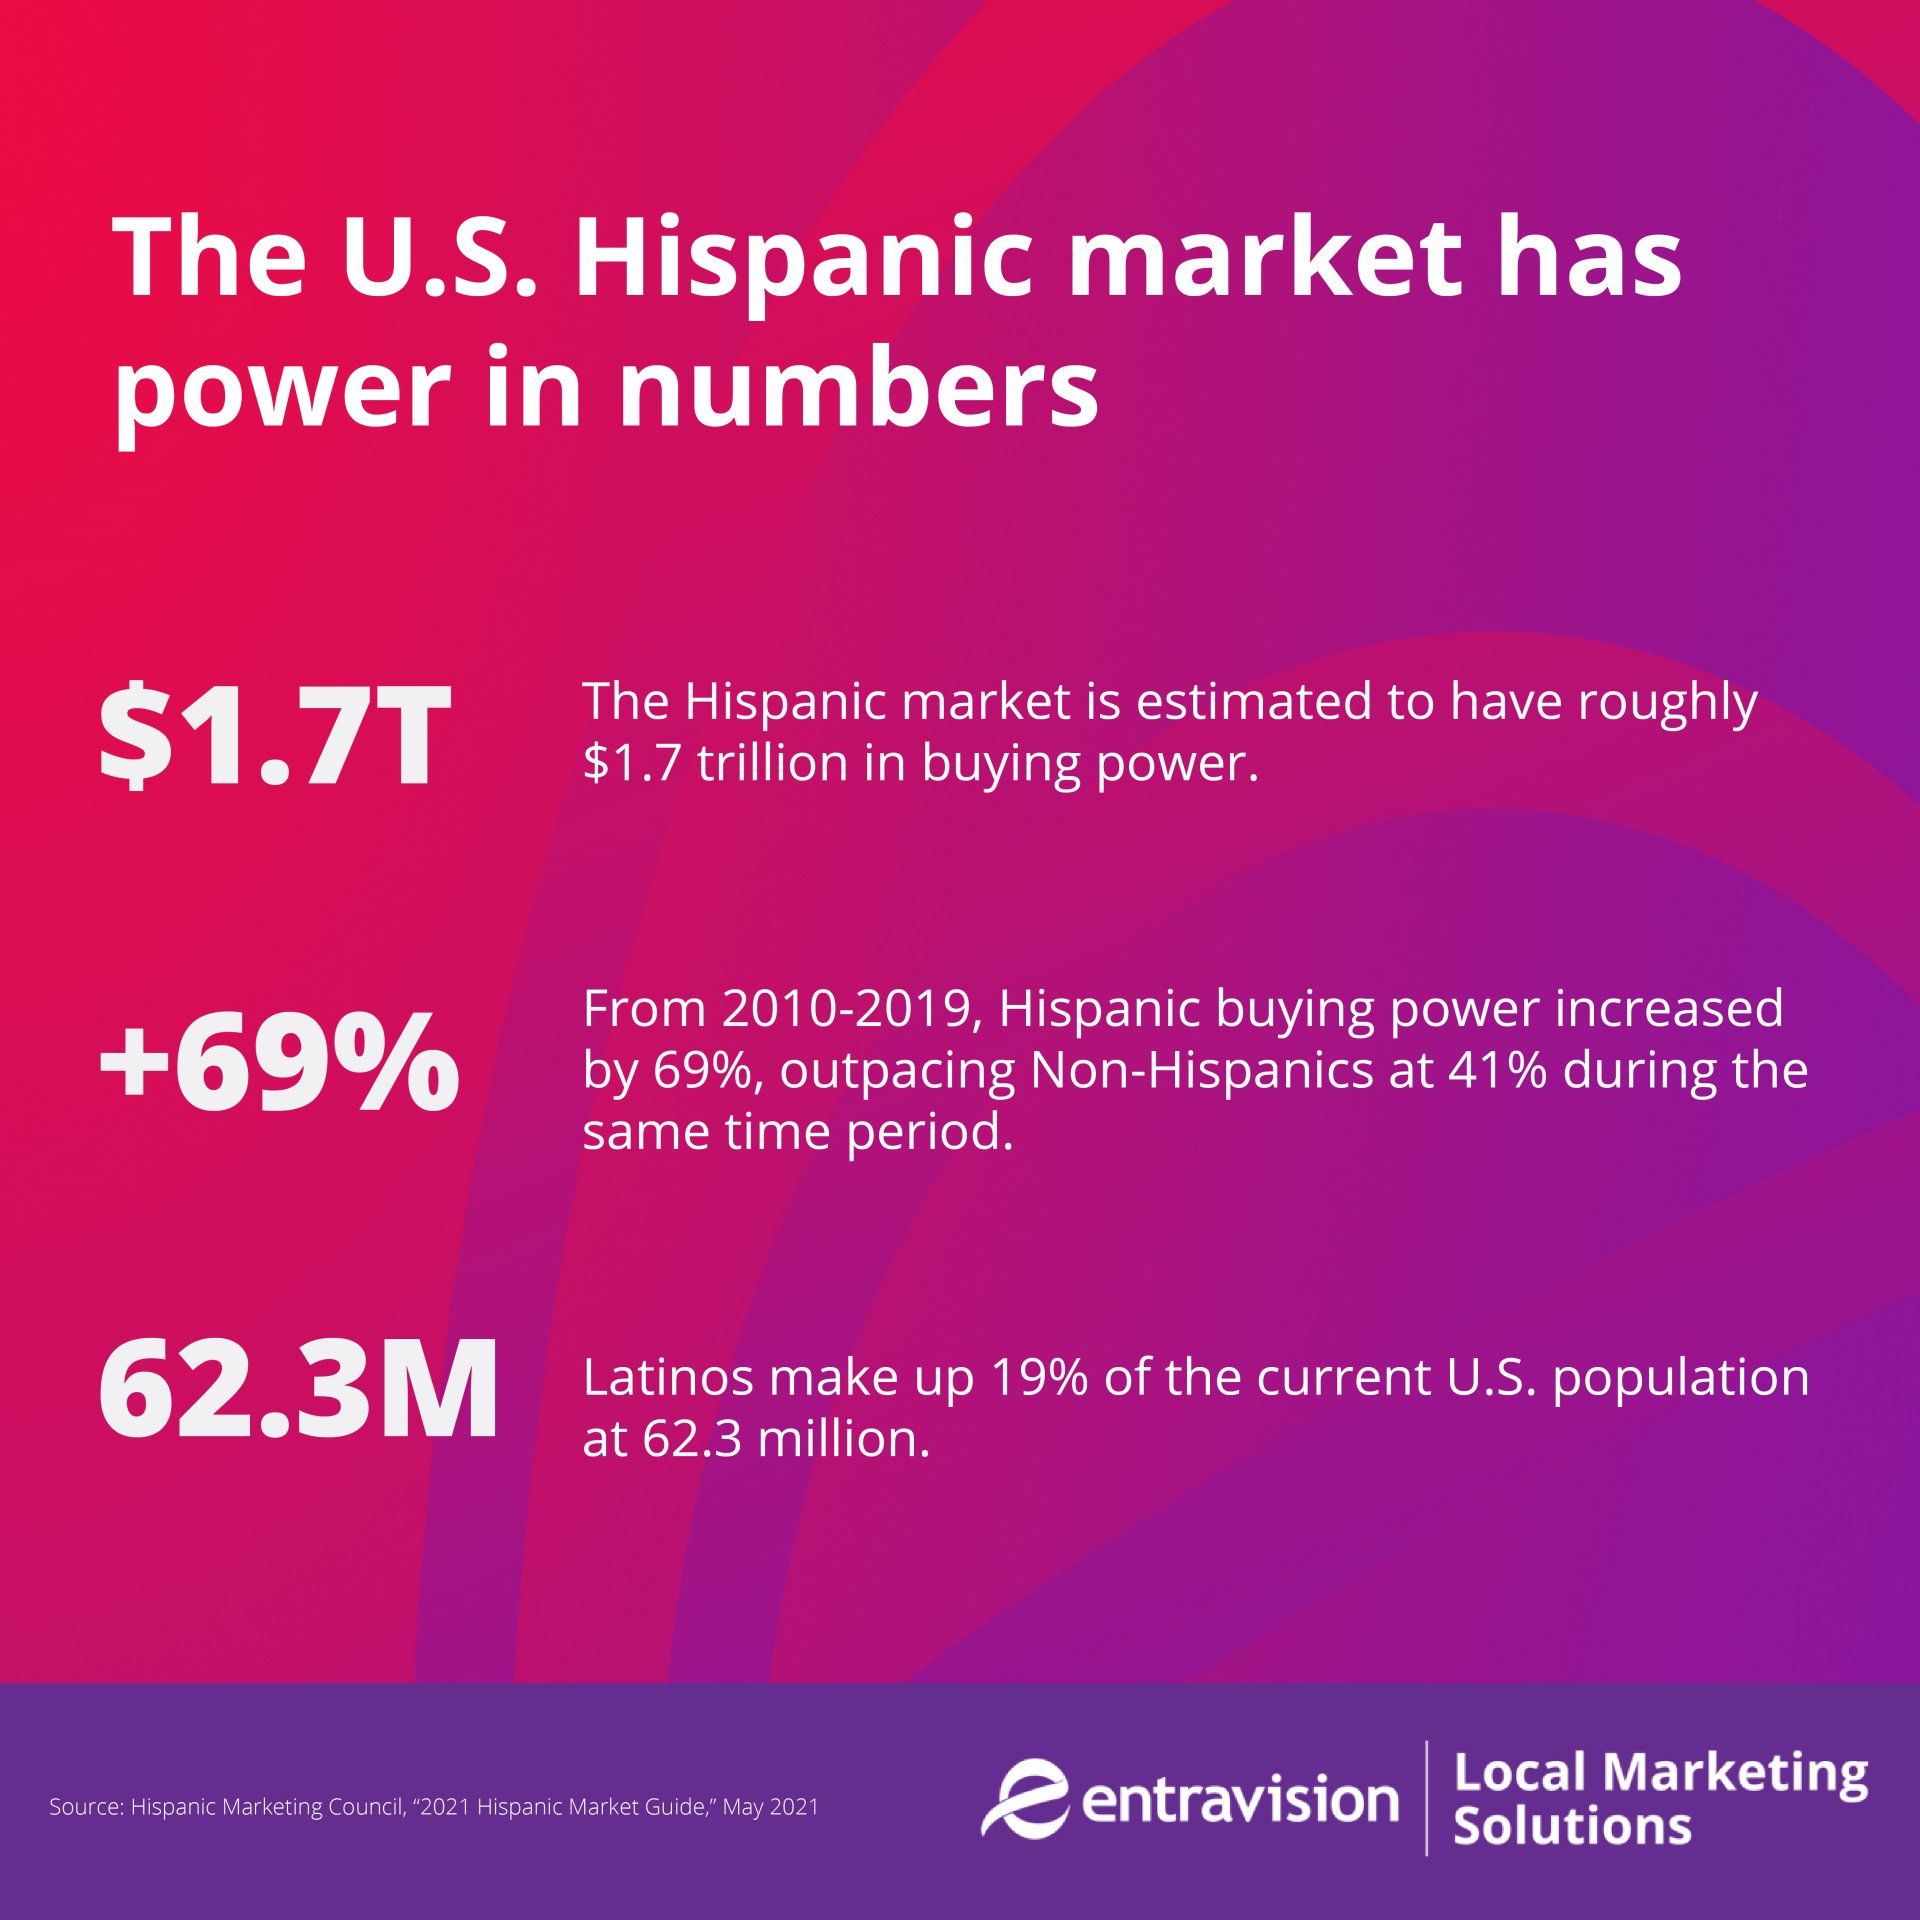 An infographic from Entravision shows that U.S. Hispanic market is highly influential thanks to their population size and spending power. Using Hispanic marketing to reach them is a great way for businesses to grow!